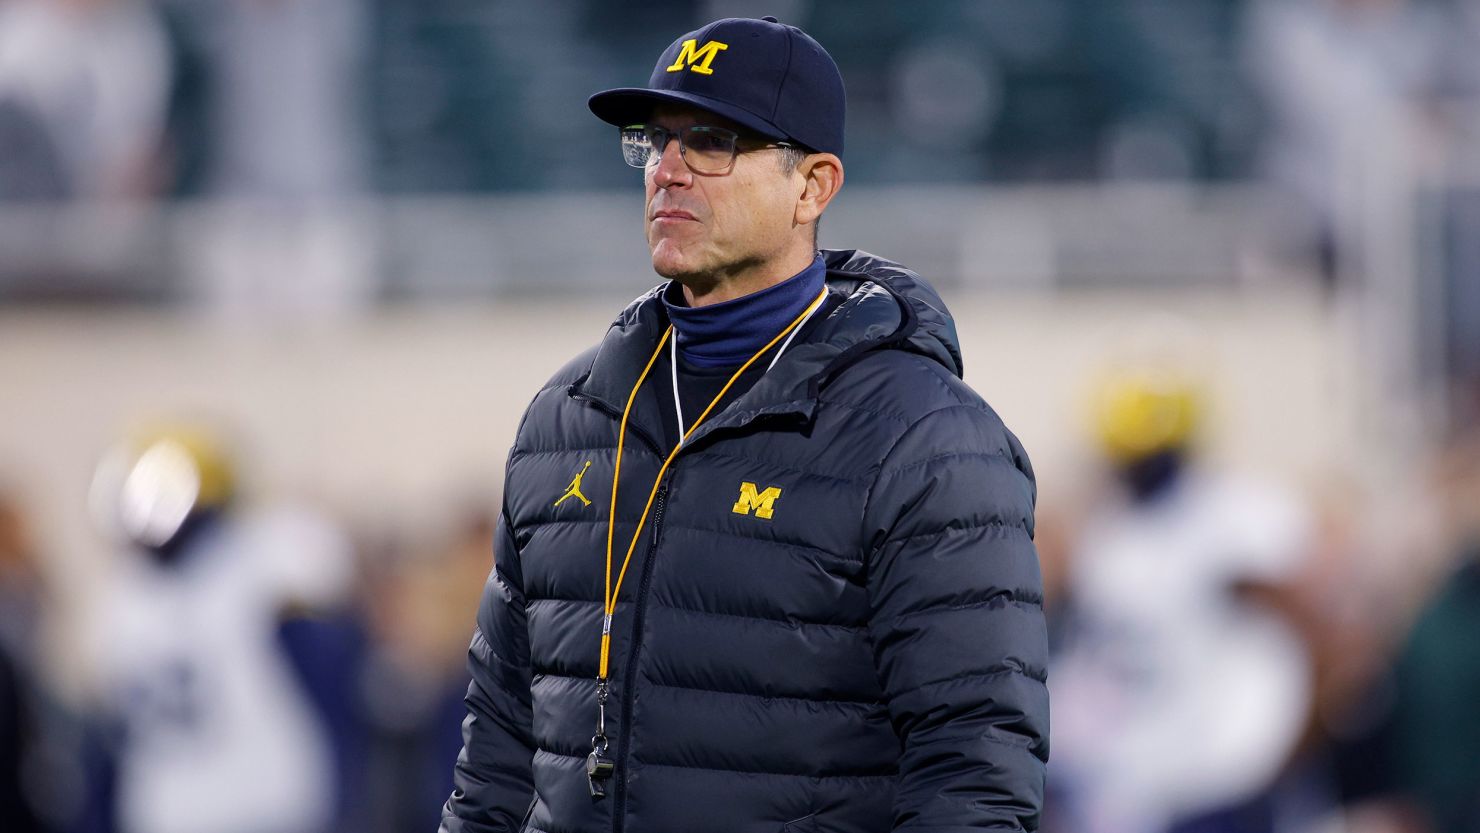 Michigan coach Jim Harbaugh watches during warmups before an NCAA college football game against Michigan State, Saturday, Oct. 21, 2023, in East Lansing, Mich. (AP Photo/Al Goldis)